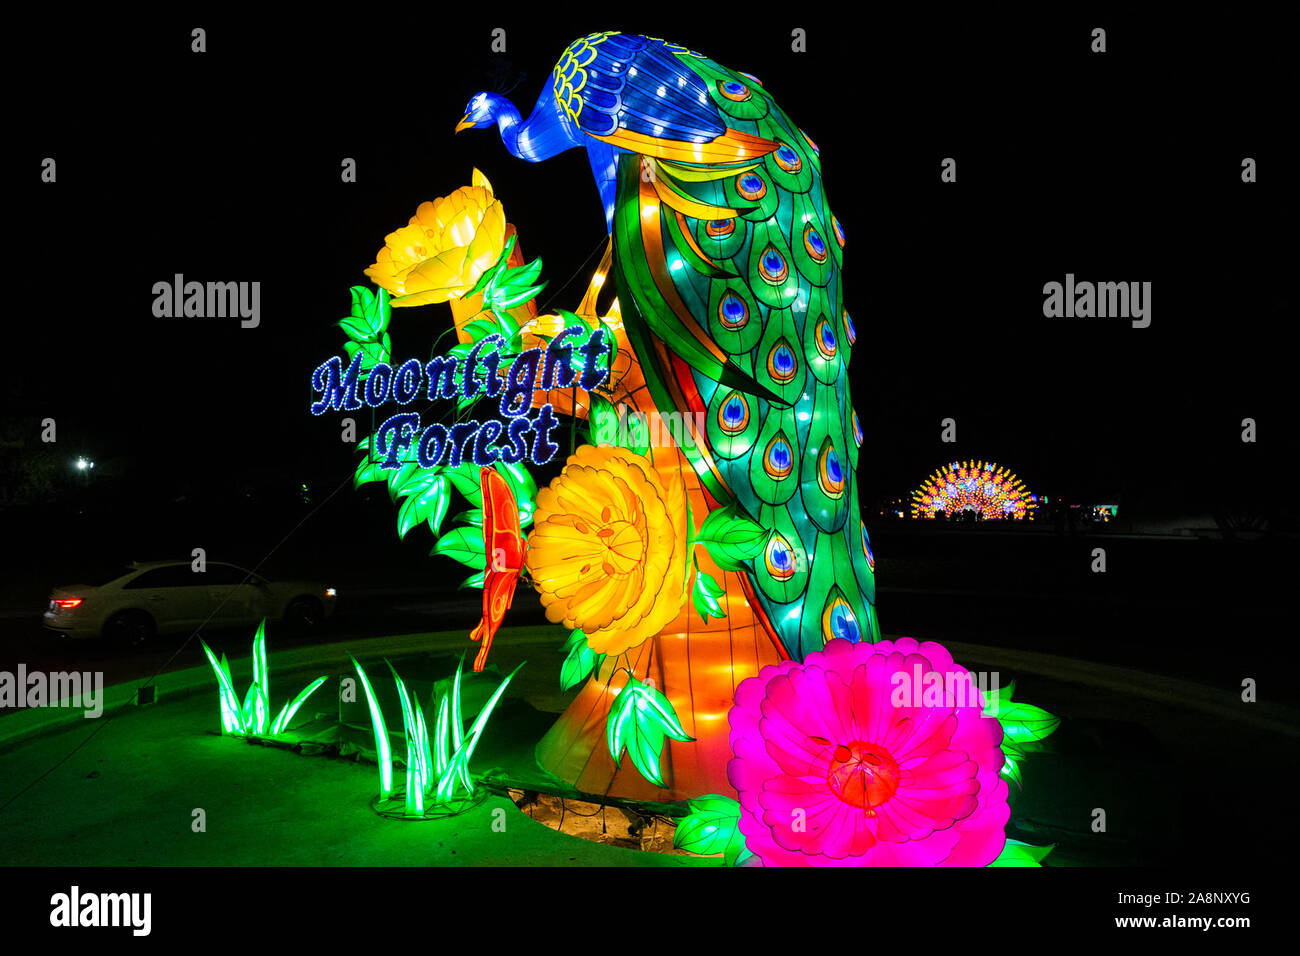 Los Angeles, USA. 9th Nov, 2019. Light installations are displayed during the Moonlight Forest Magical Lantern Art Festival at the Los Angeles County Arboretum and Botanic Garden in Los Angeles, the United States, Nov. 9, 2019. Credit: Qian Weizhong/Xinhua/Alamy Live News Stock Photo